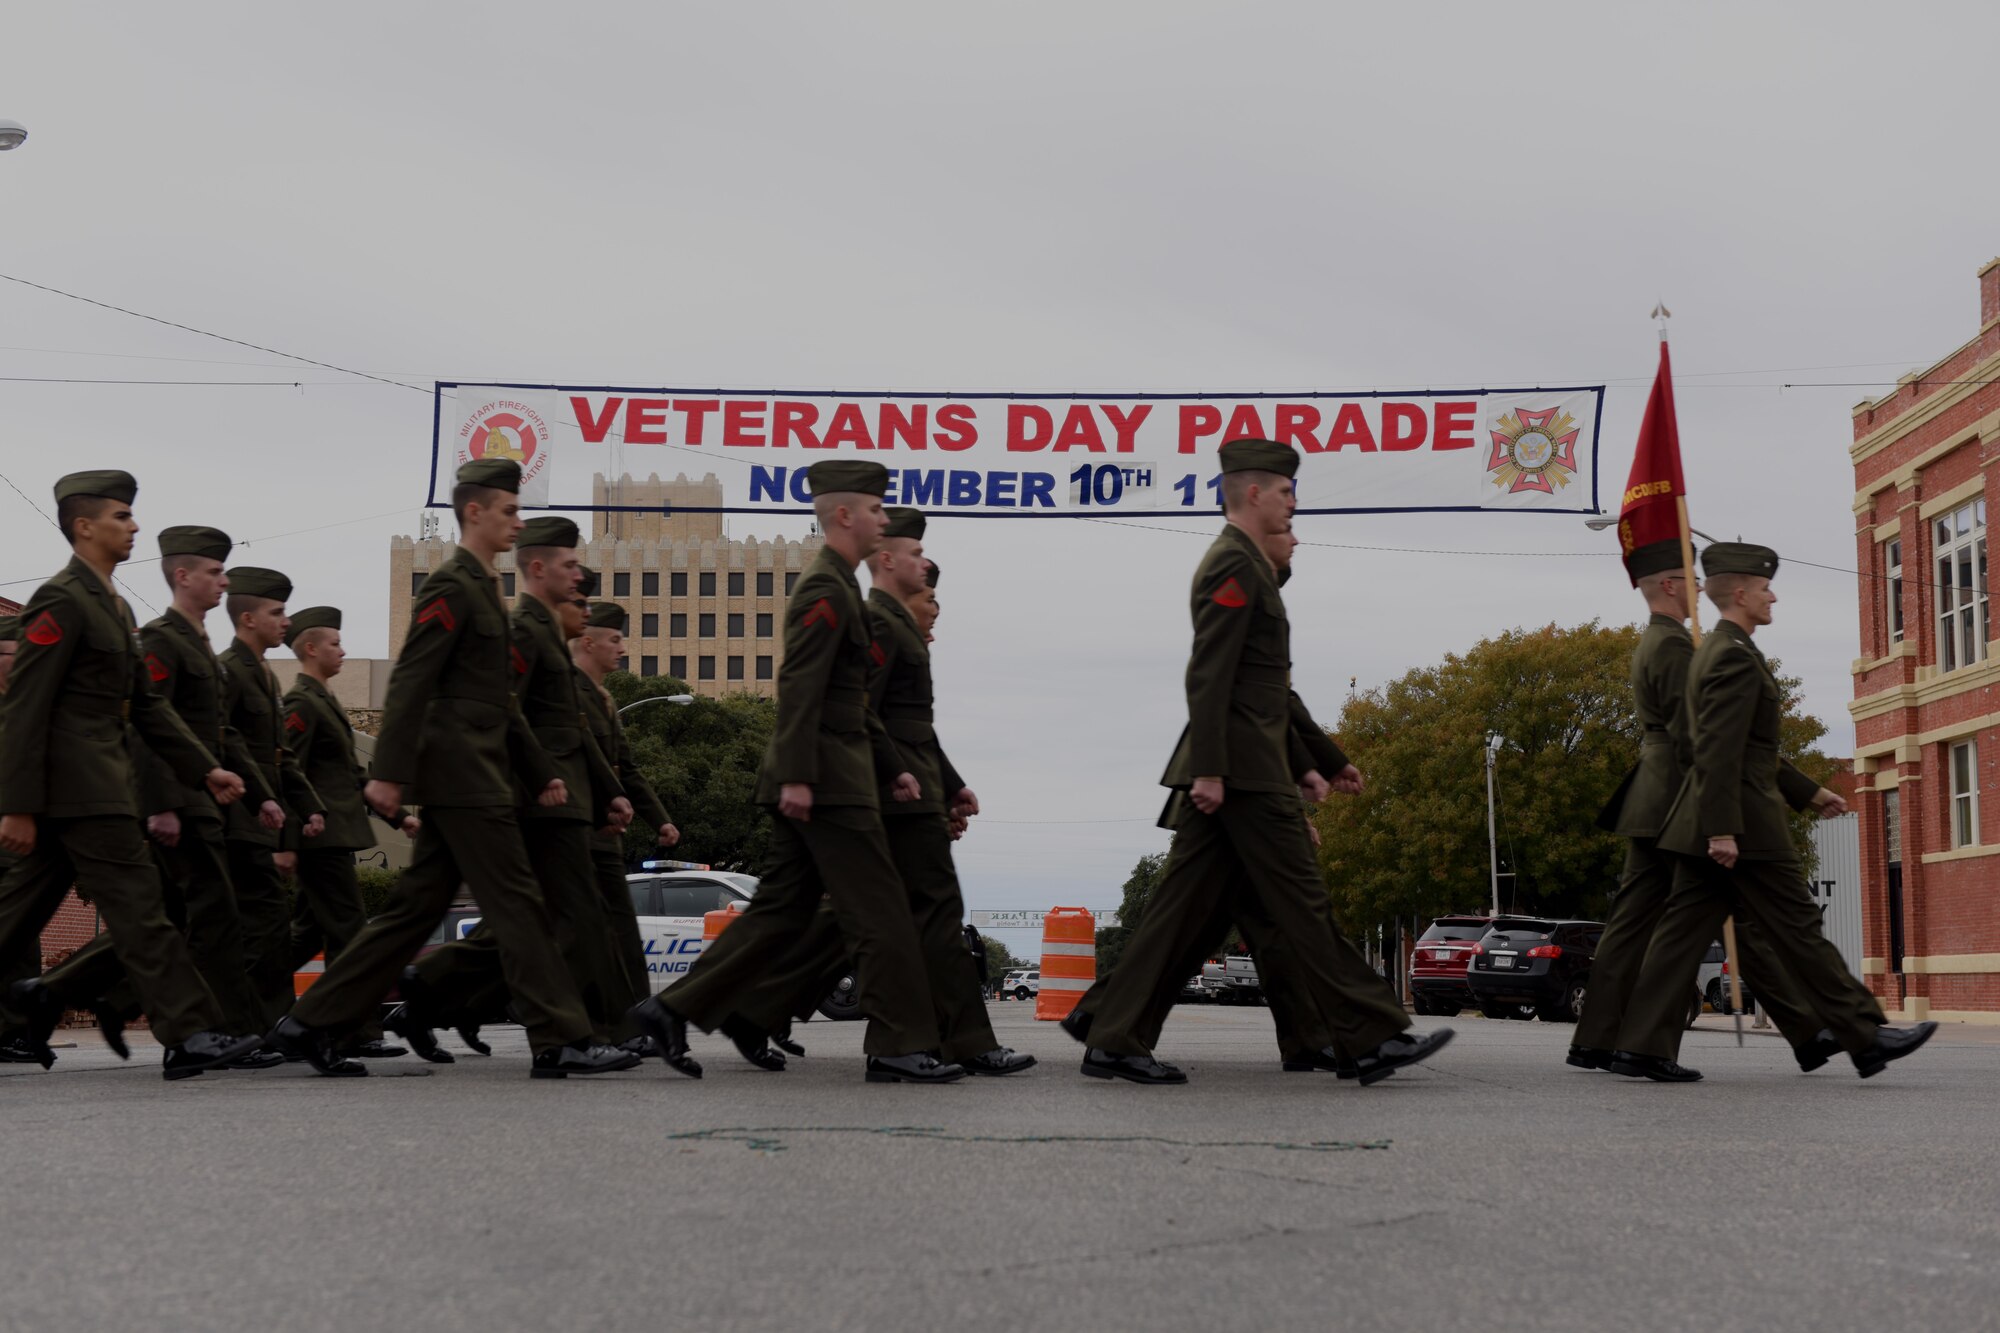 Marines from the Marine Corps Detachment at Goodfellow Air Force Base march in the Veterans Day Parade in San Angelo, Texas, Nov. 10, 2018. The parade represented each branch of the U.S. Armed Forces. (U.S. Air Force photo by Senior Airman Randall Moose/Released)